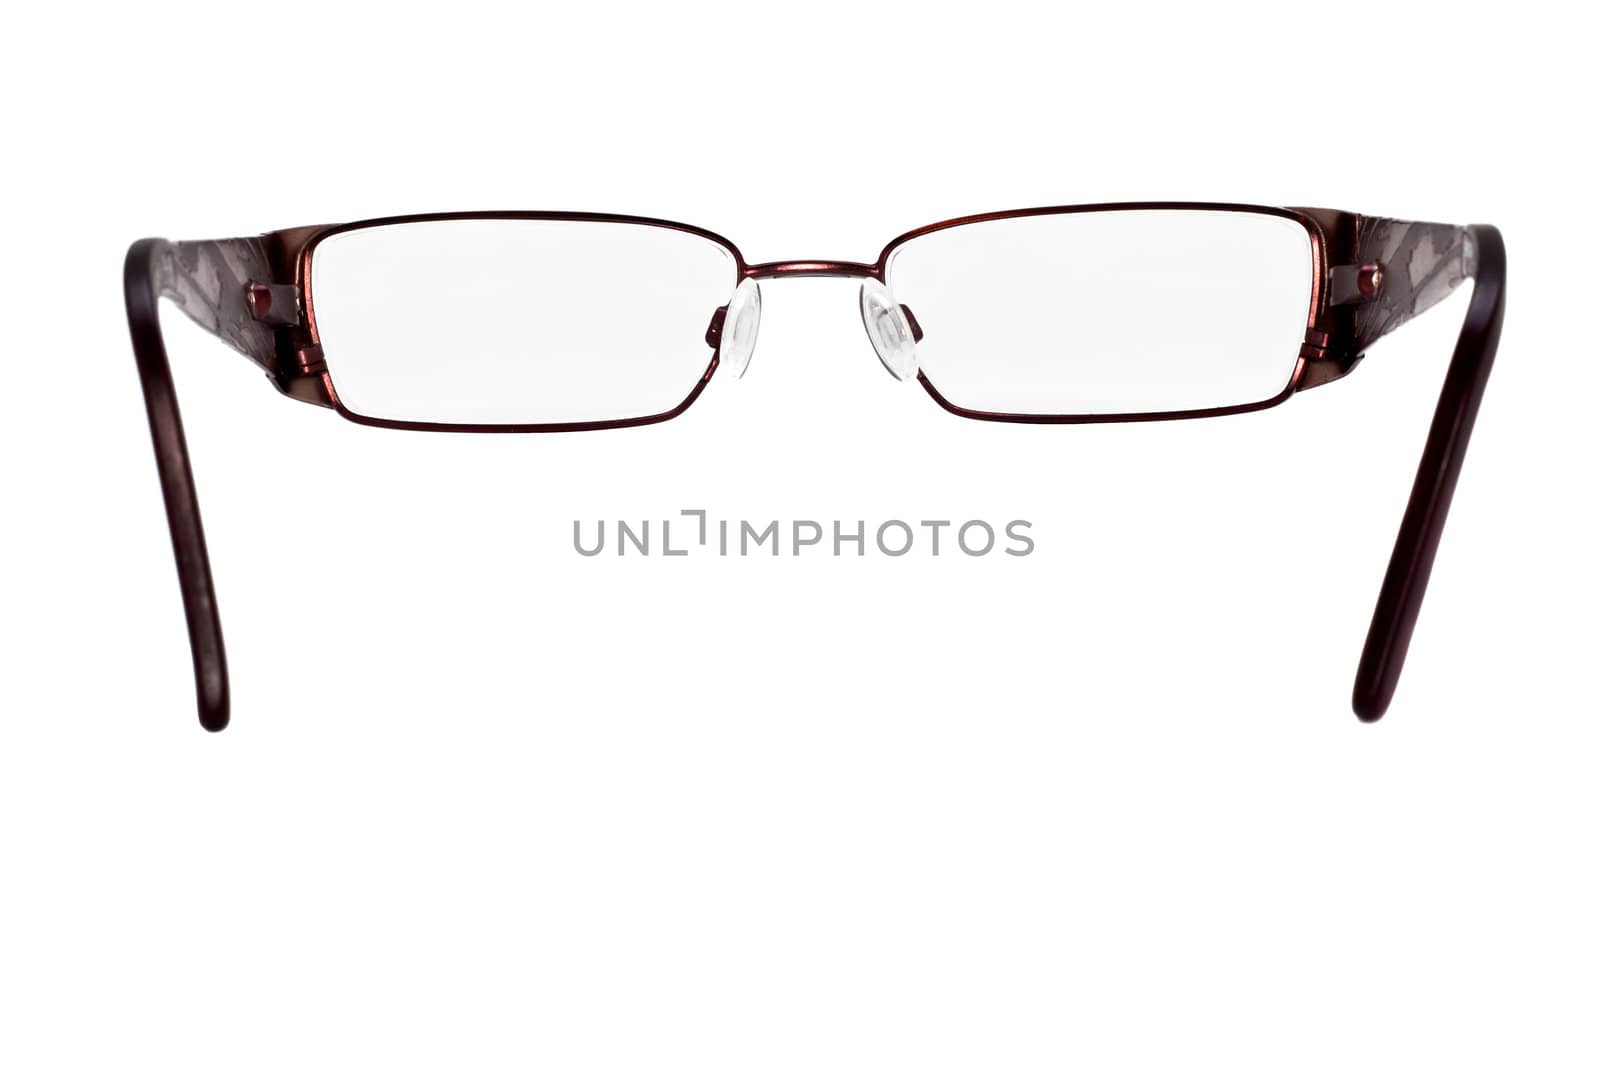 A  pair of eye glasses on a white background